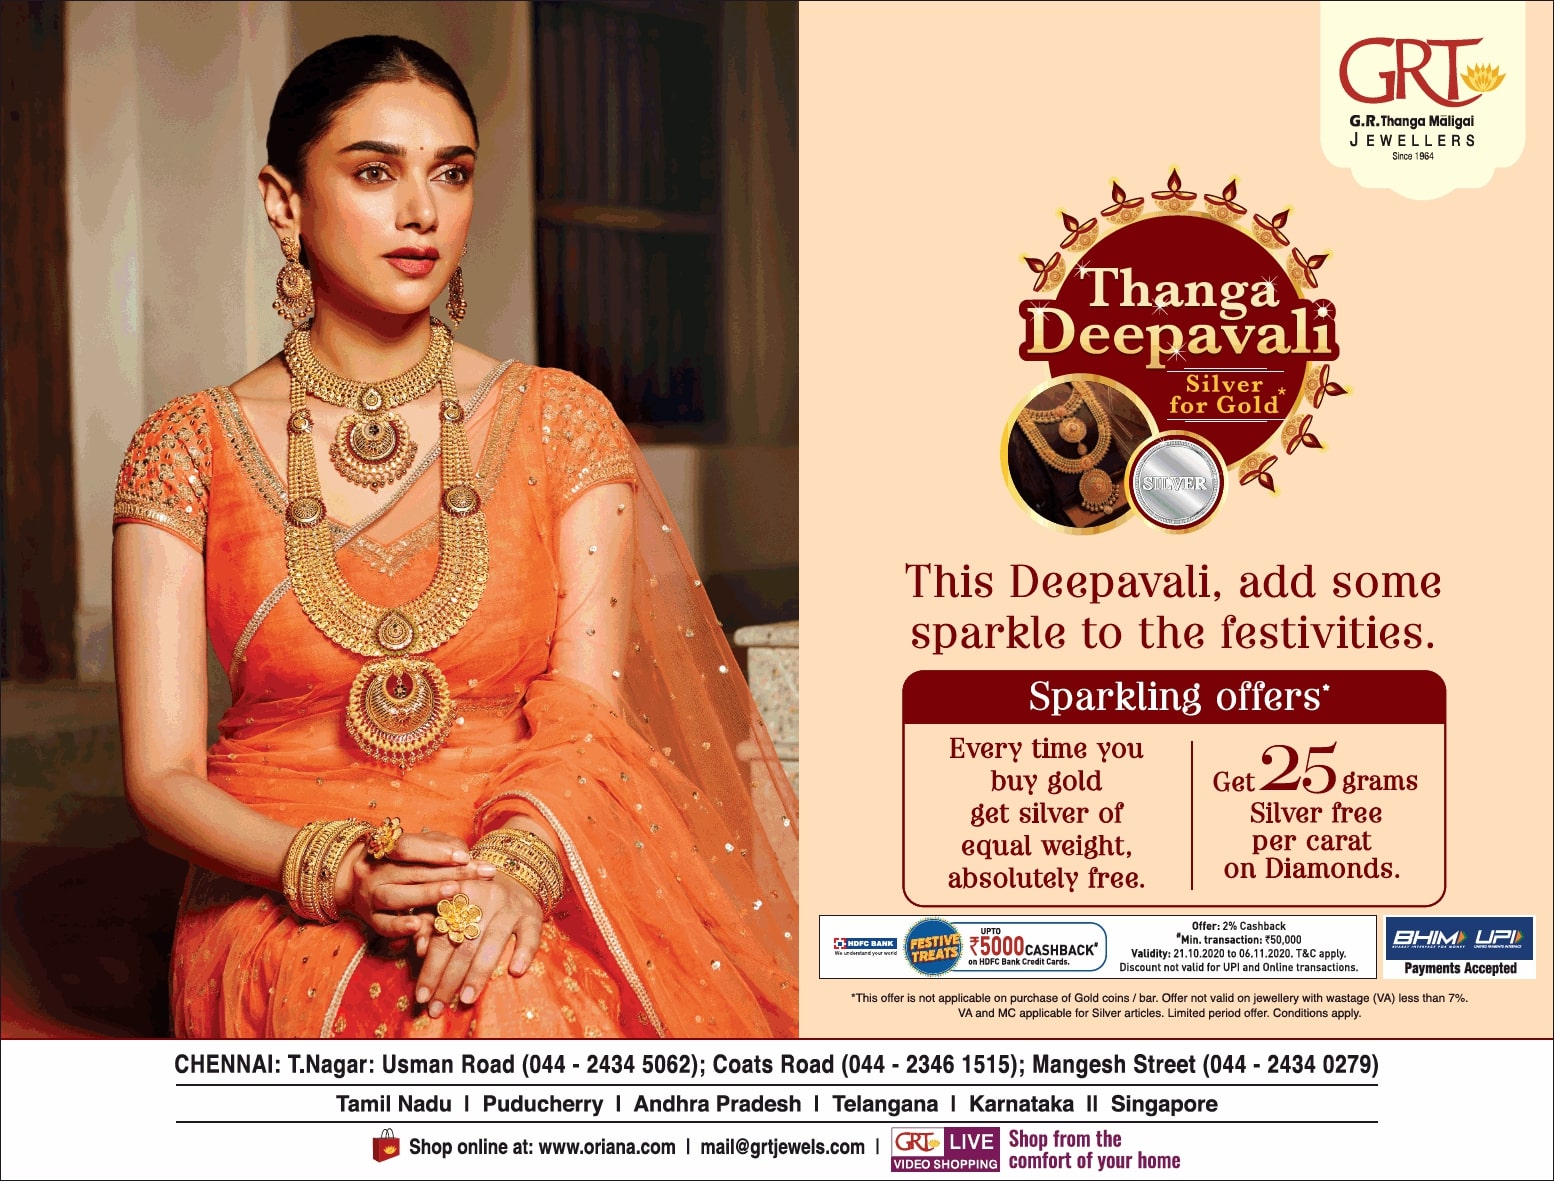 grt-jewellers-thanga-deepavali-every-time-you-buy-gold-get-silver-of-equal-weight-absolutely-free-ad-toi-chennai-4-11-2020